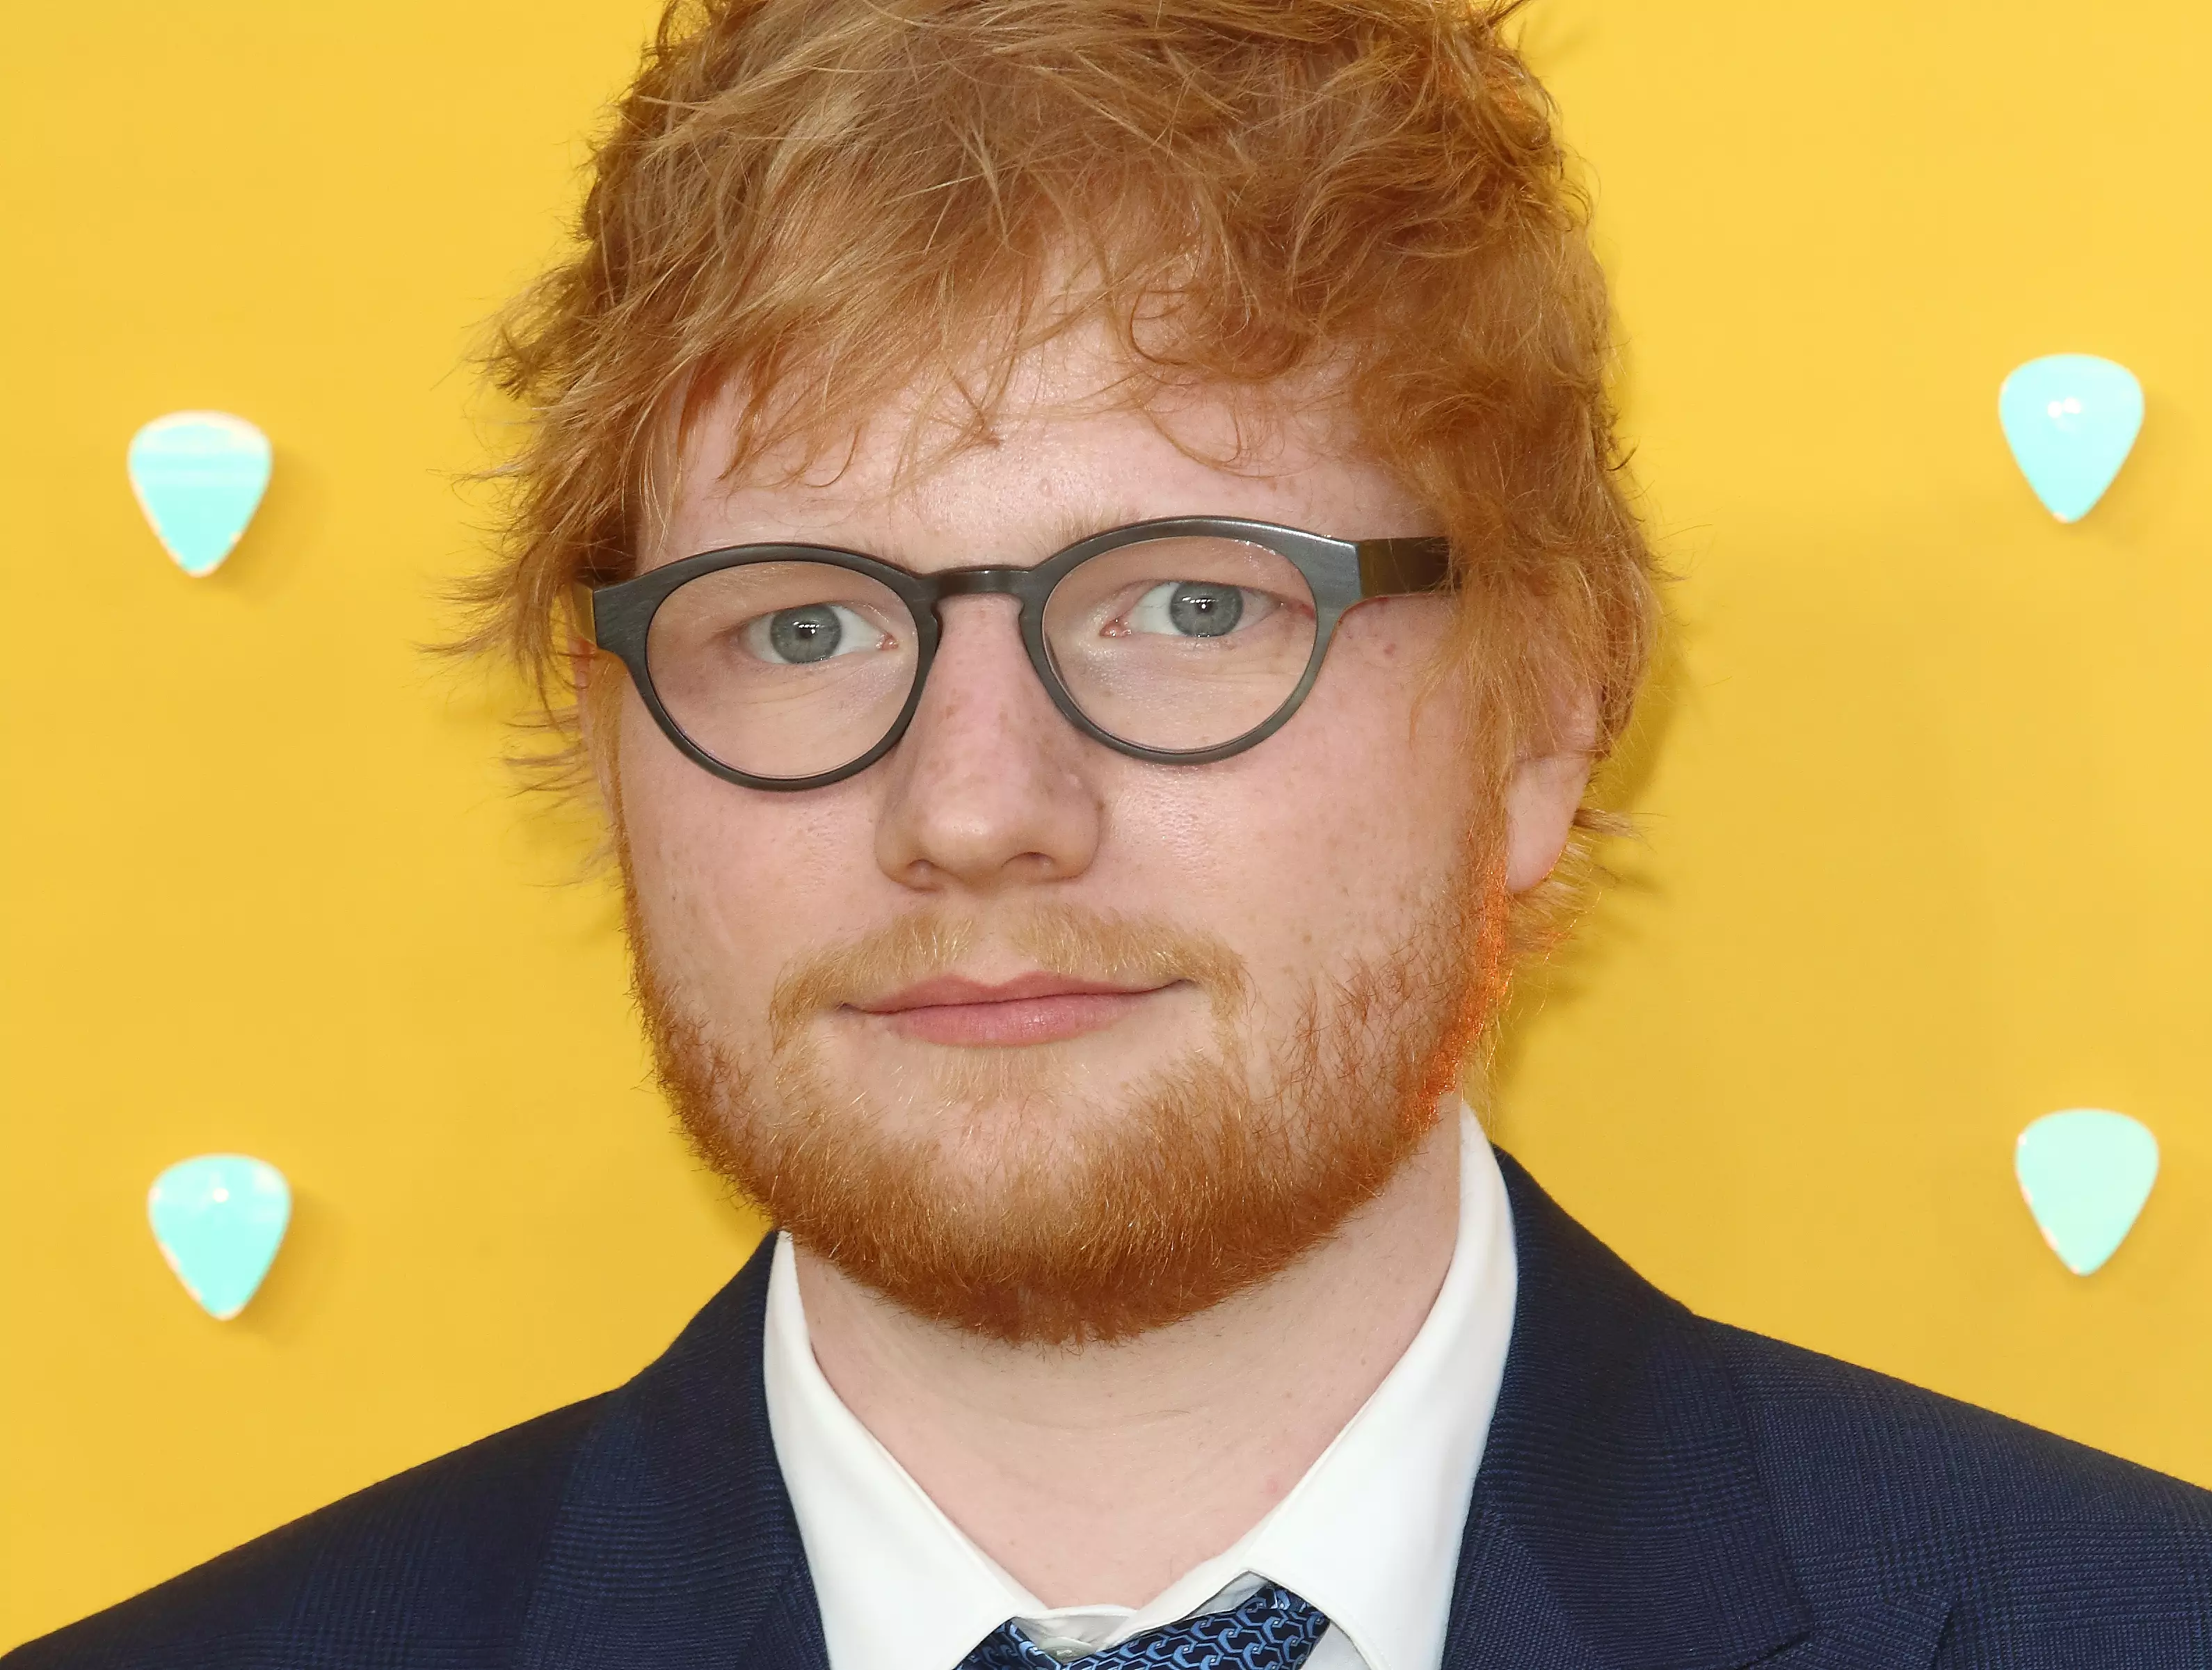 Ed has said he doesn't like when fans film or photograph him as it can make him feel like he's 'in a zoo'.